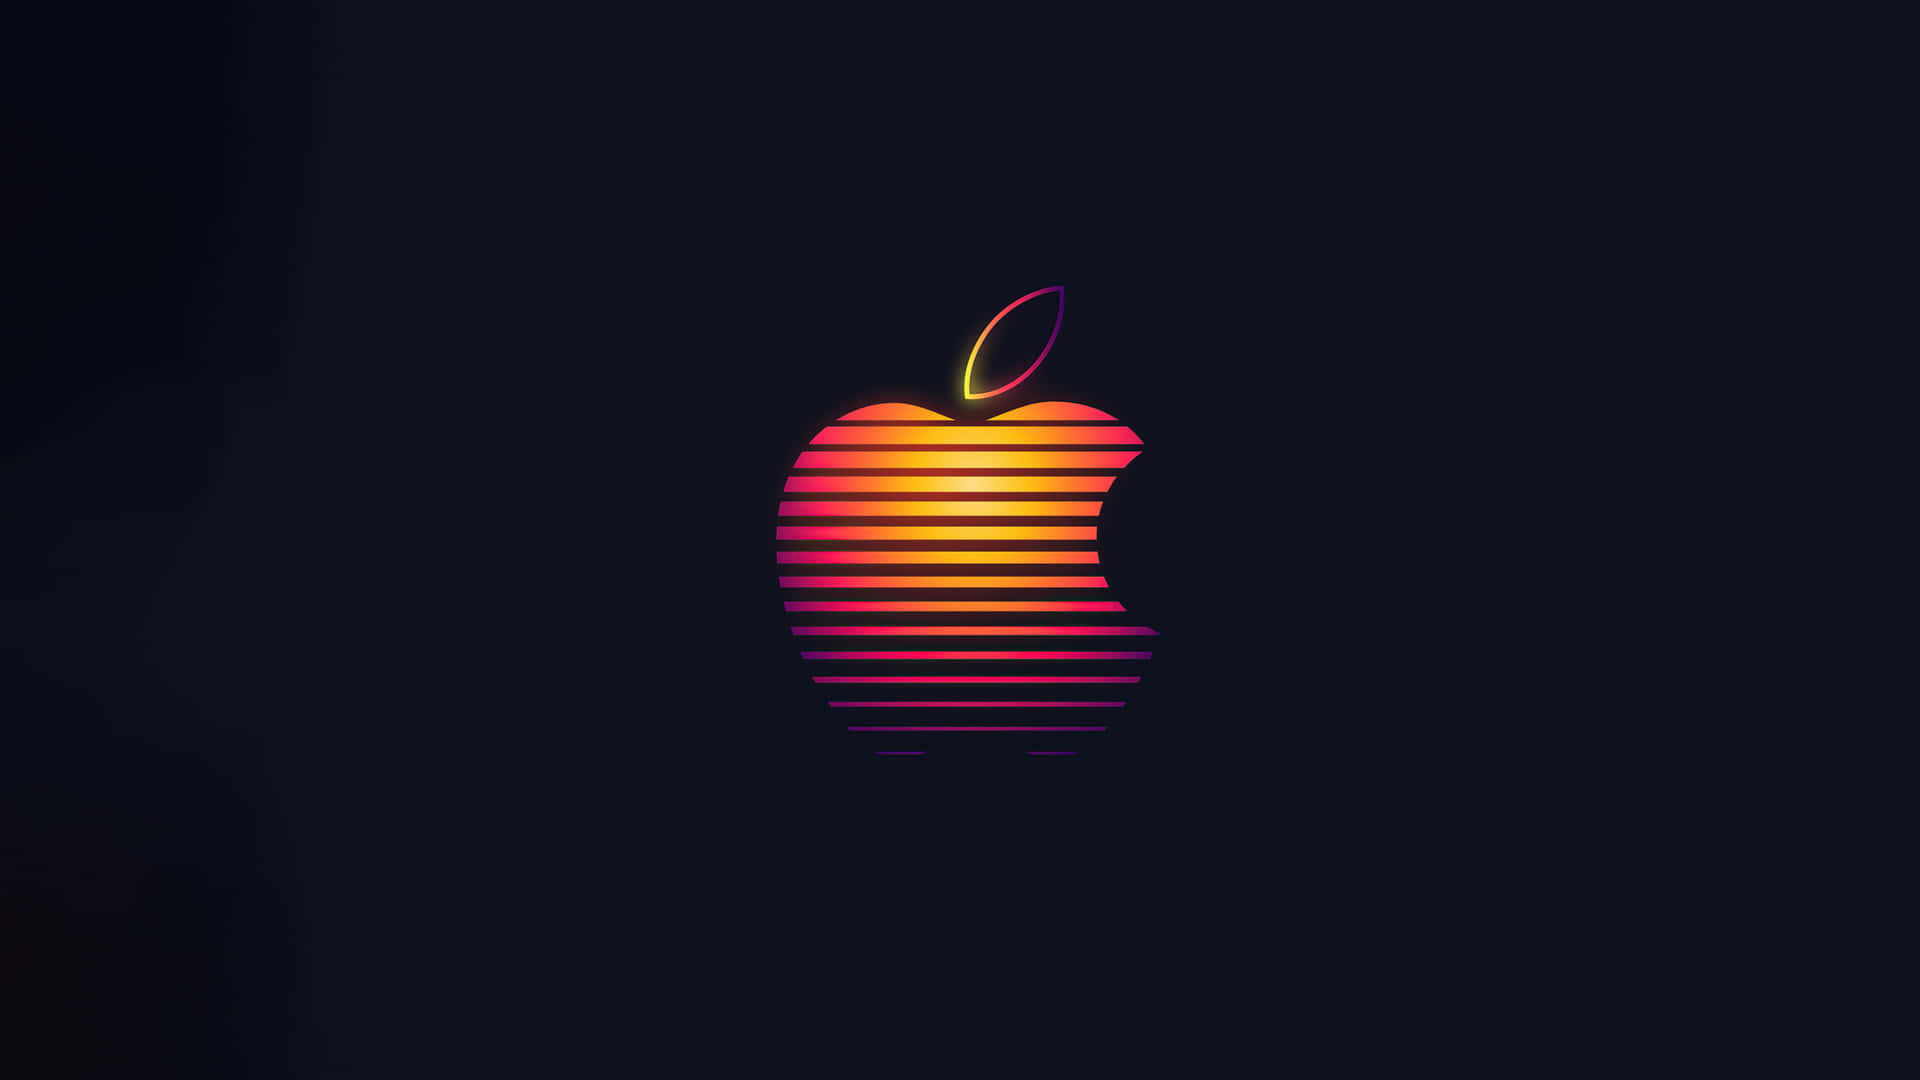 Close-up of a Perfect Red Apple Wallpaper